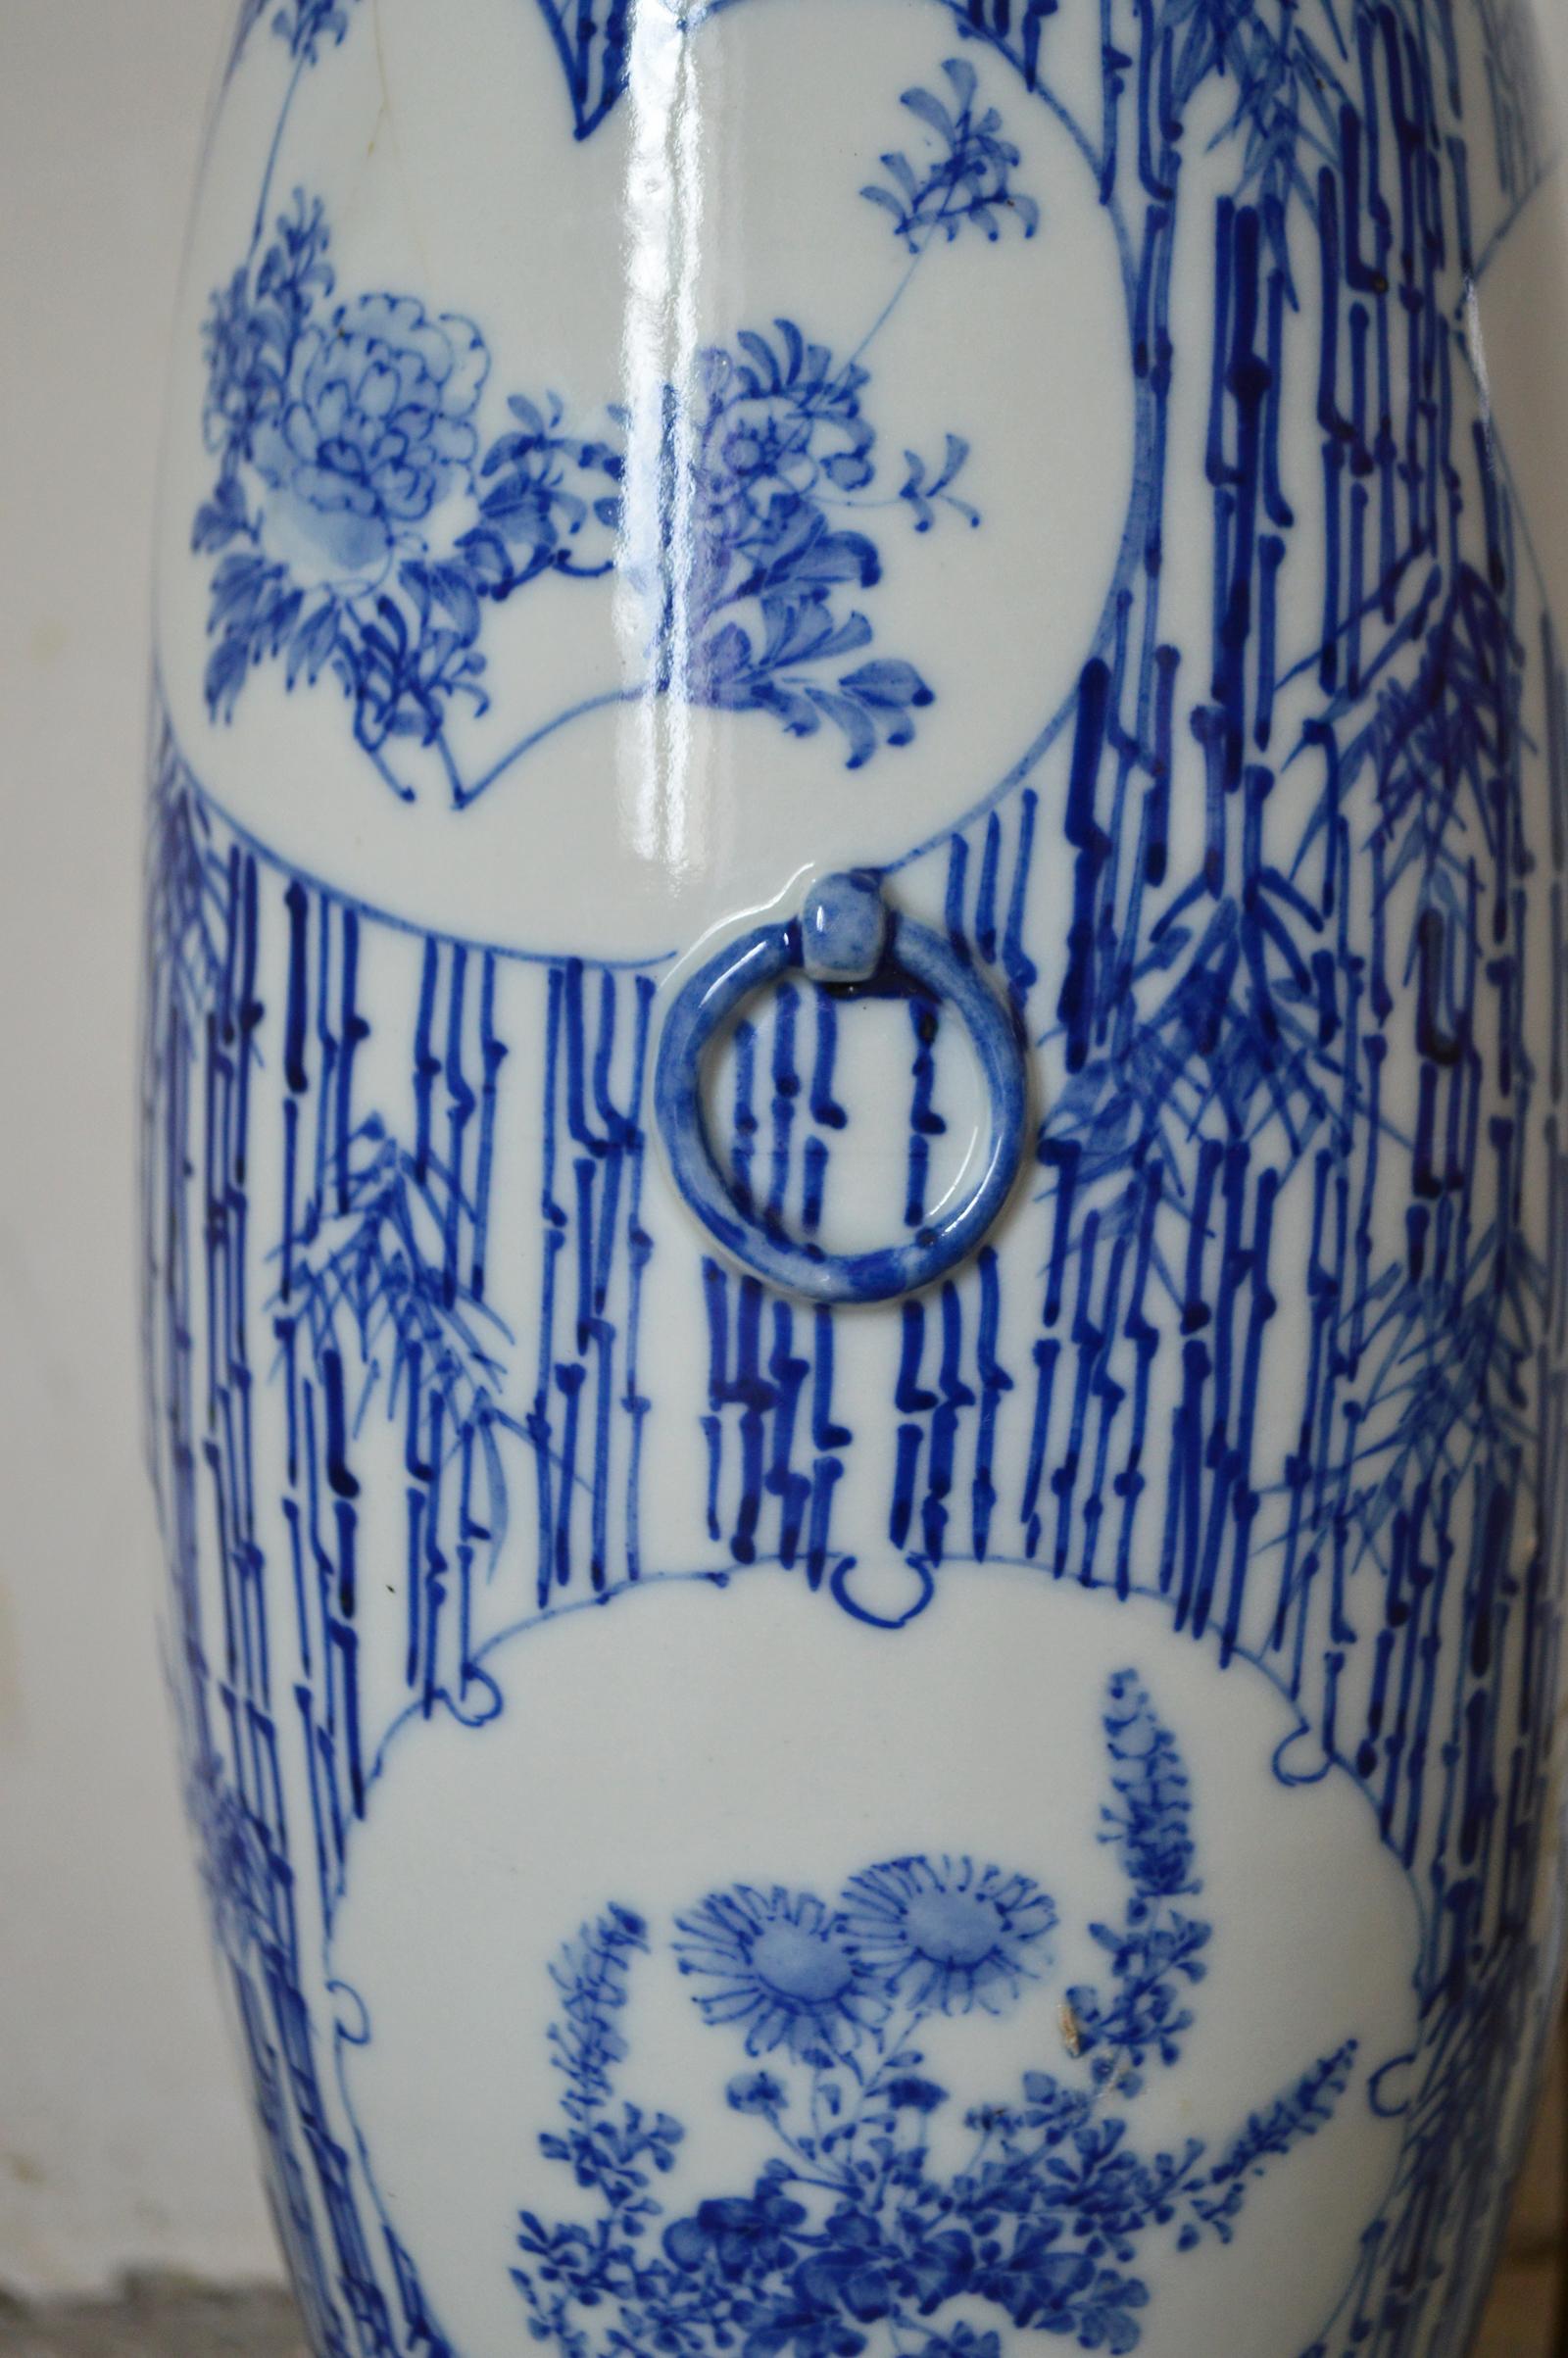 19th Century Antique Chinese Blue and White Porcelain Vase Mounted as Lamp, Floral Theme